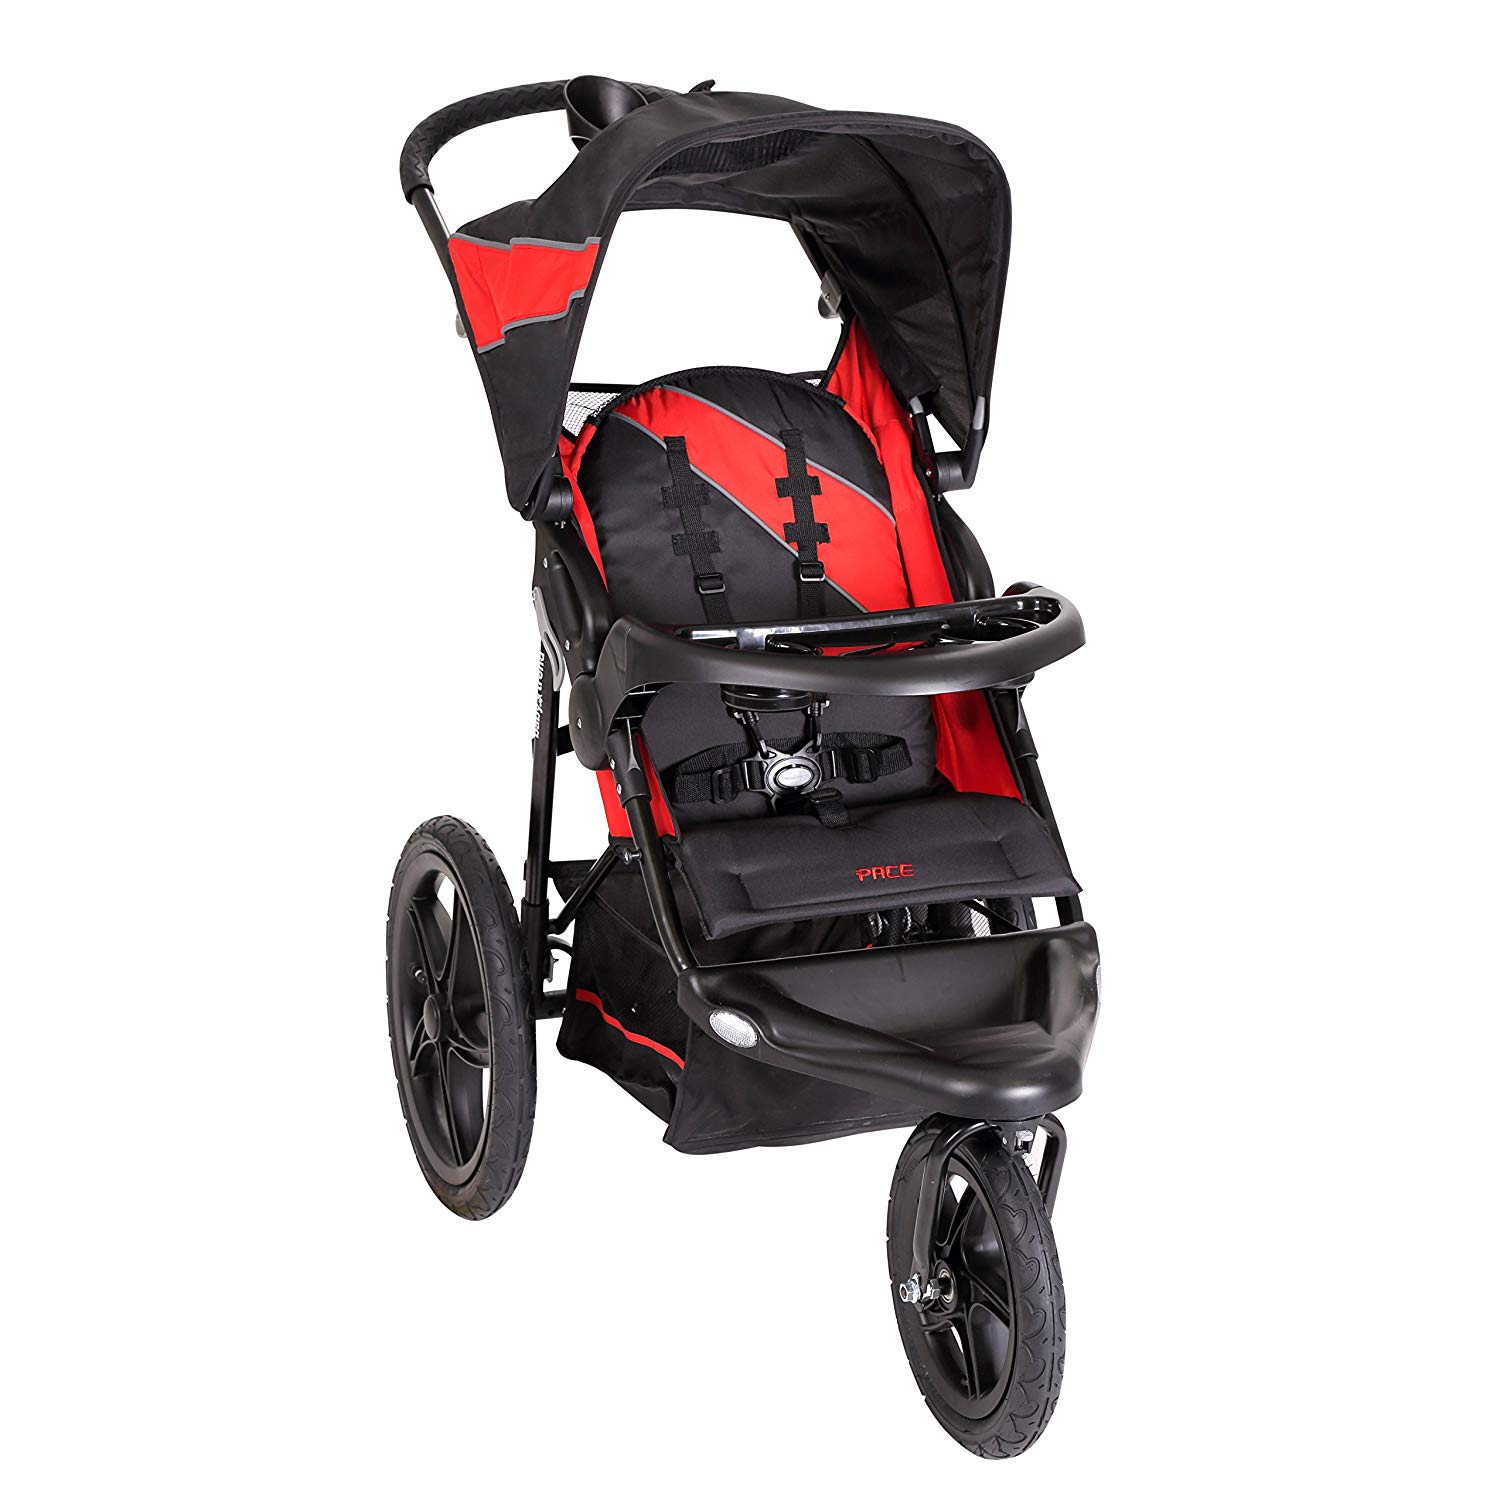 Baby Trend XCEL Infant/Child All Terrain Fitness Travel Jogger Stroller, Picante - image 1 of 6